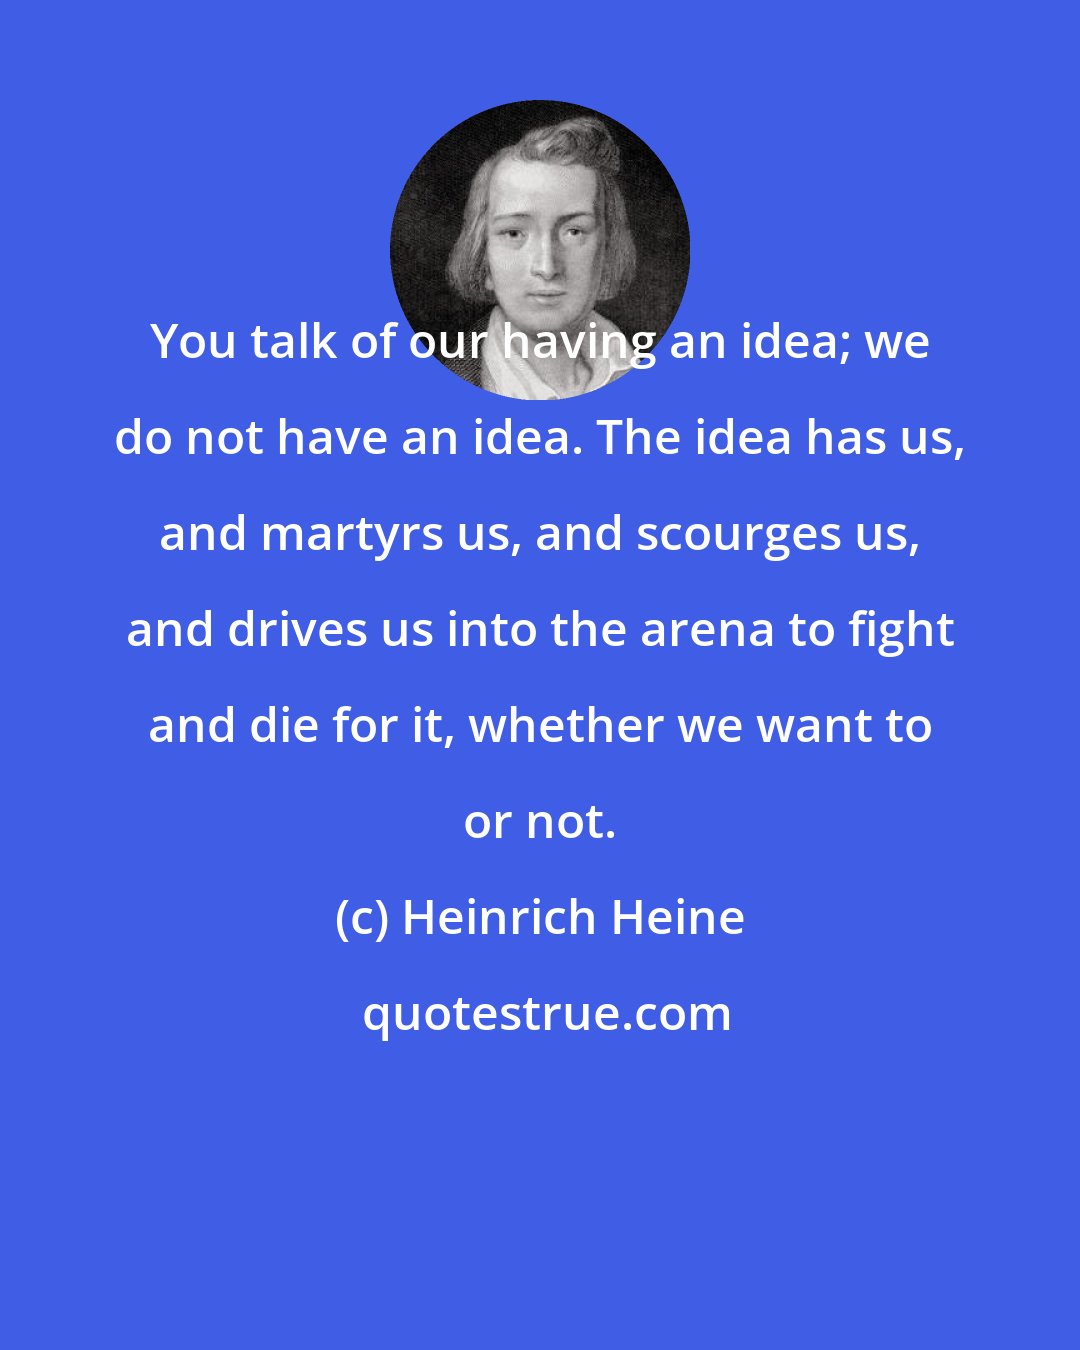 Heinrich Heine: You talk of our having an idea; we do not have an idea. The idea has us, and martyrs us, and scourges us, and drives us into the arena to fight and die for it, whether we want to or not.